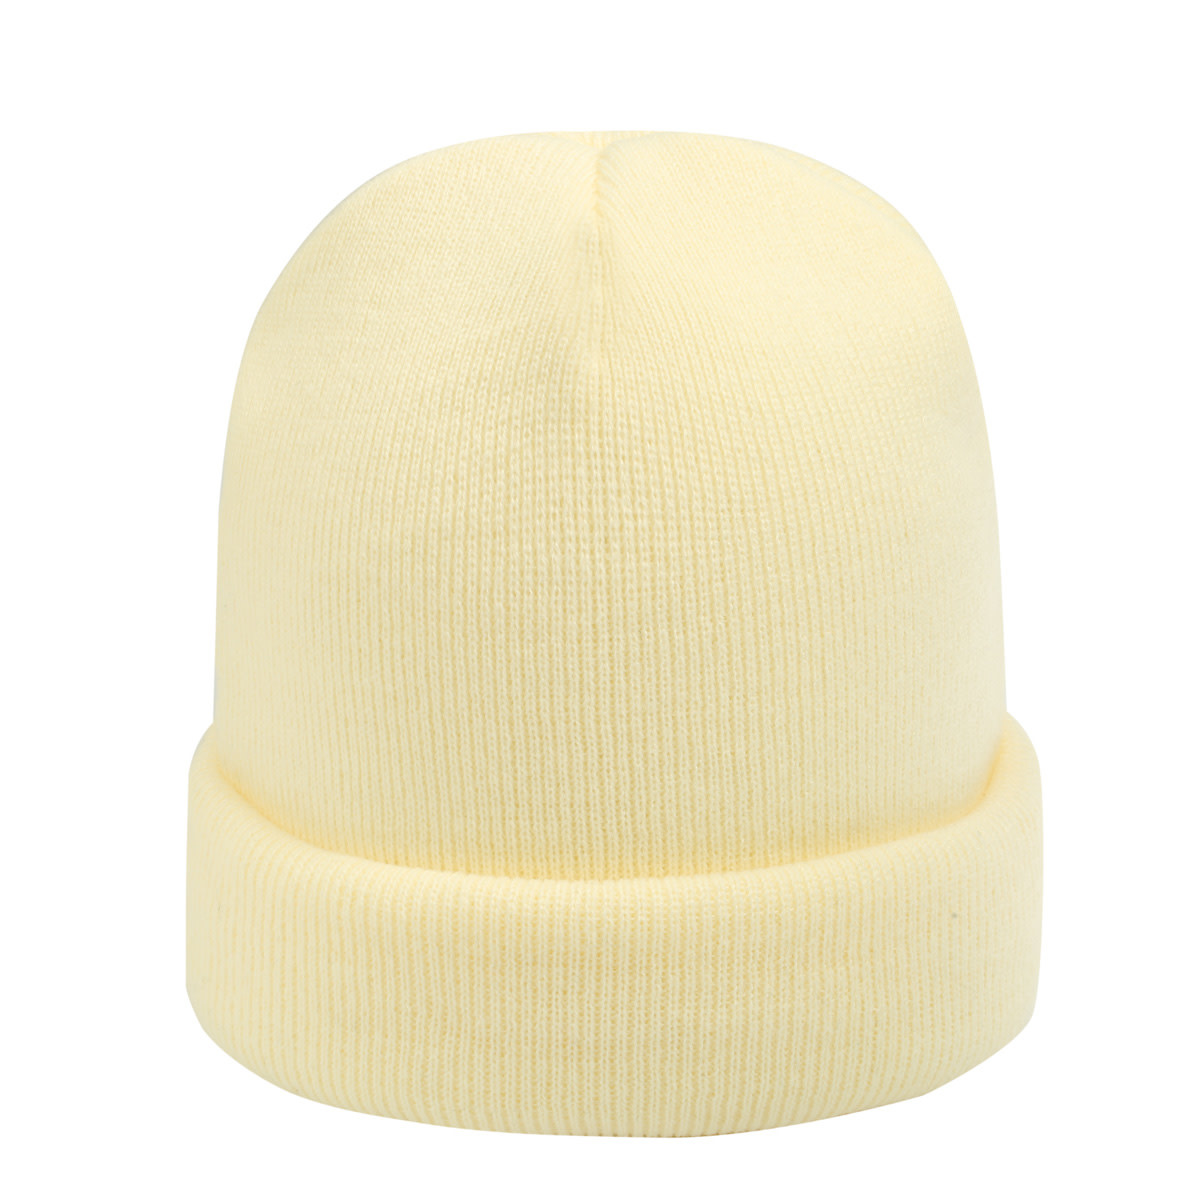 With love Beanie rainbow colors - off white